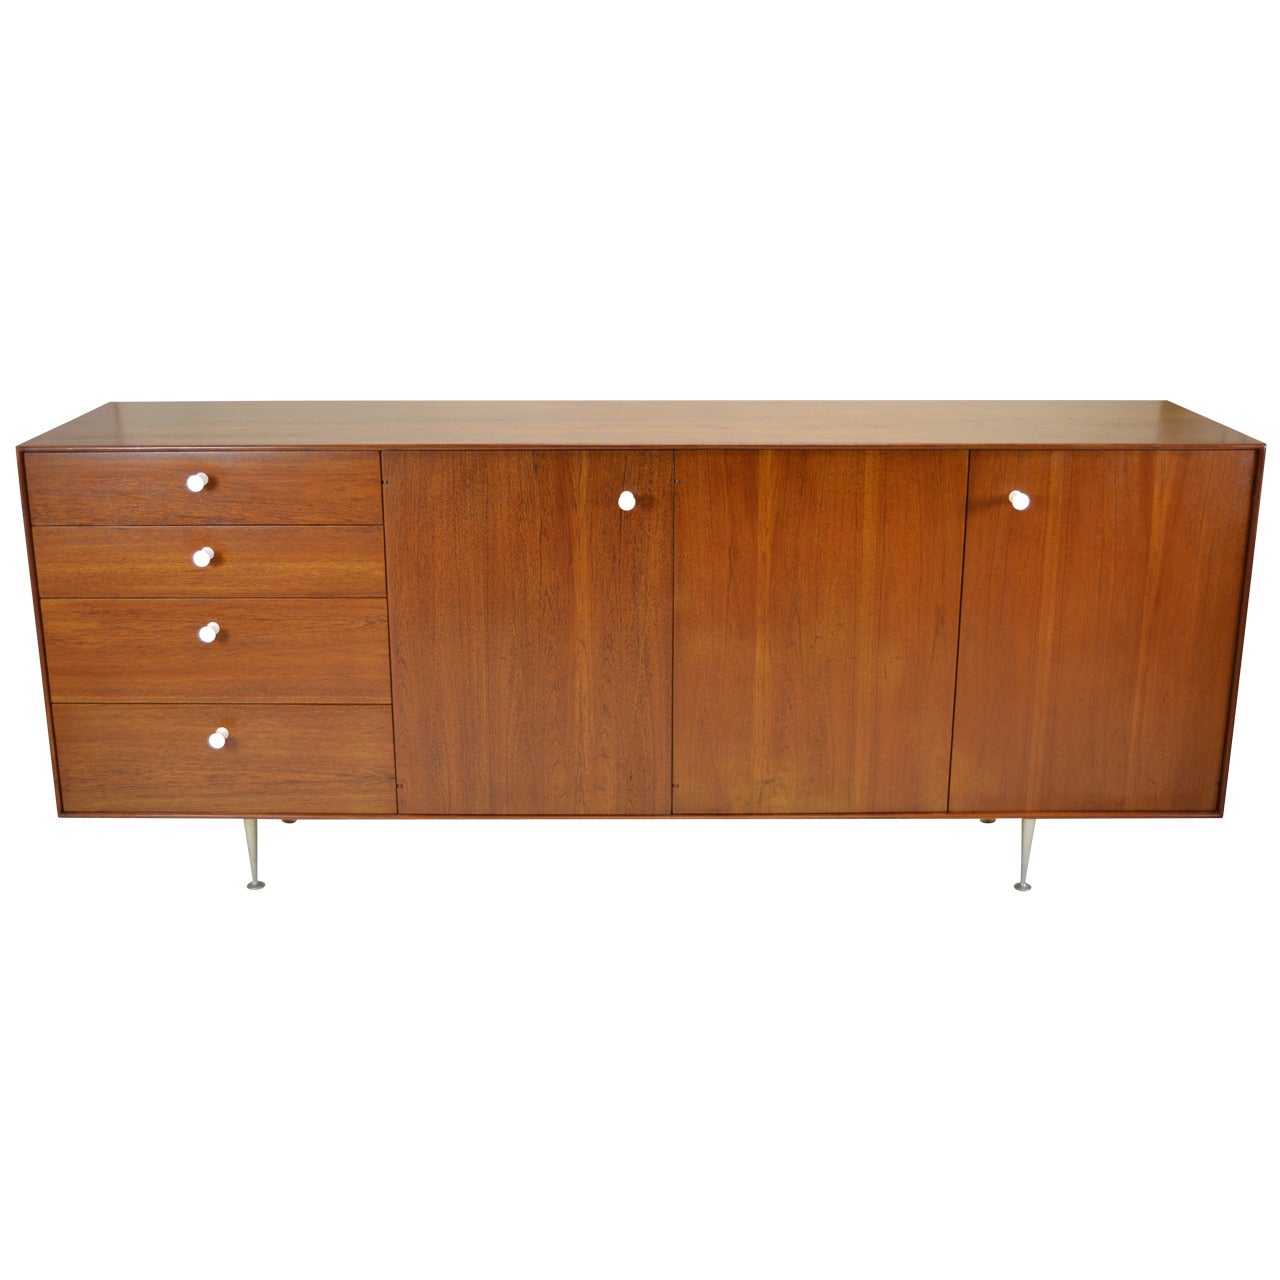 George Nelson Thin Edge Sideboard for Herman Miller, circa 1950s